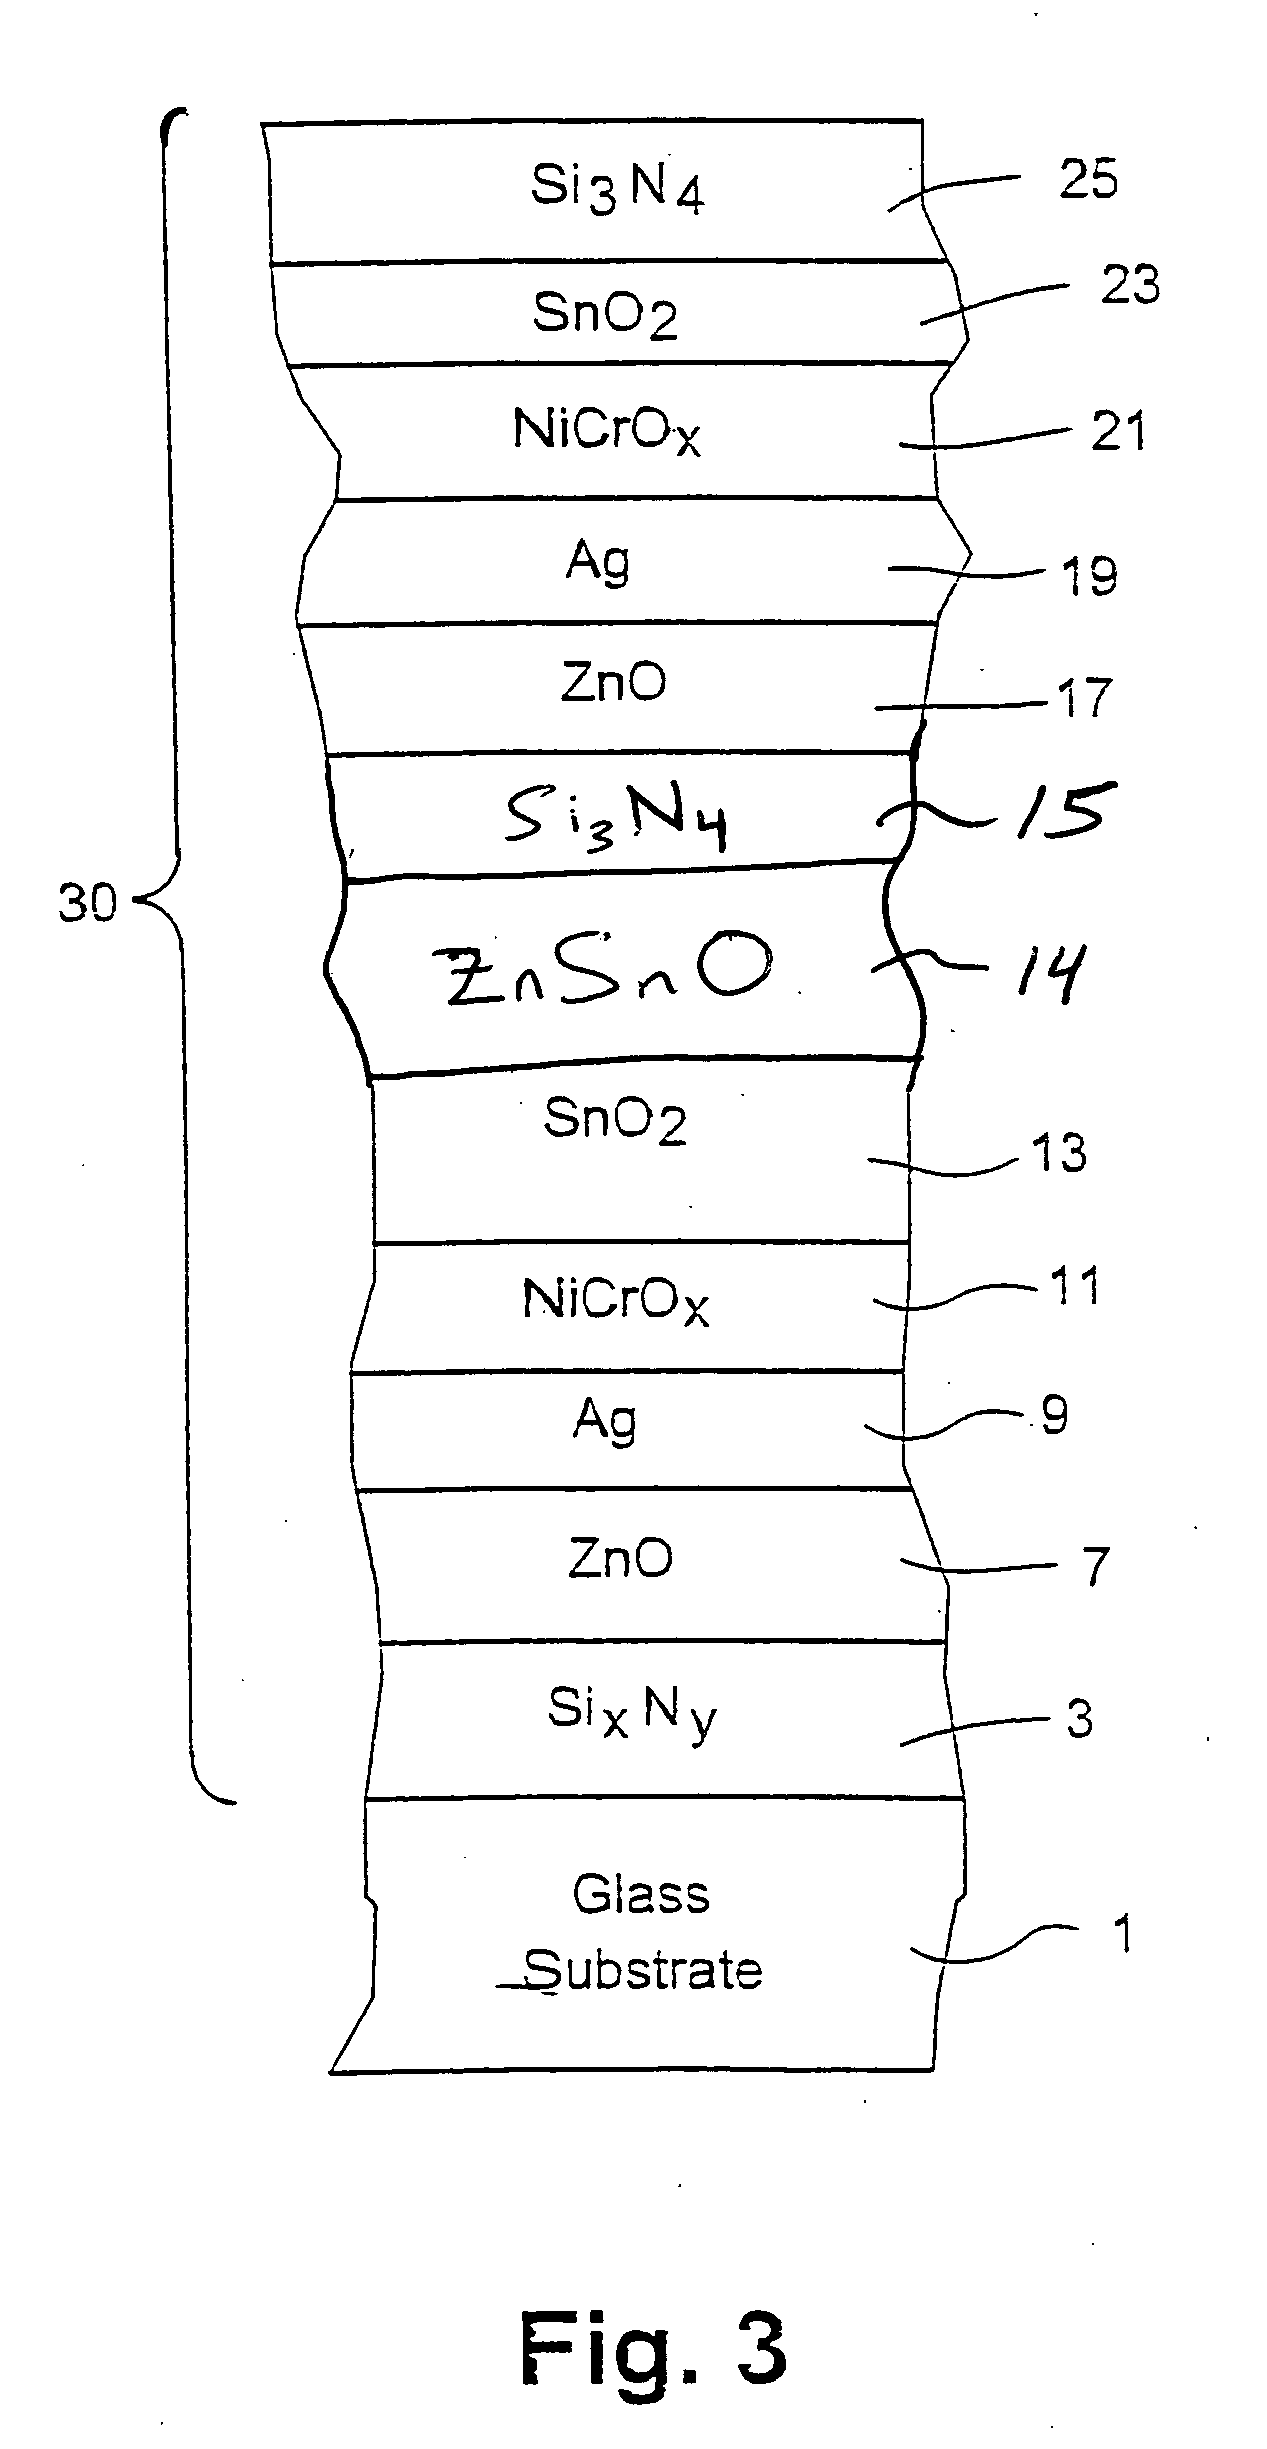 Coated article with low-e coating having zinc stannate based layer between IR reflecting layers for reduced mottling and corresponding method